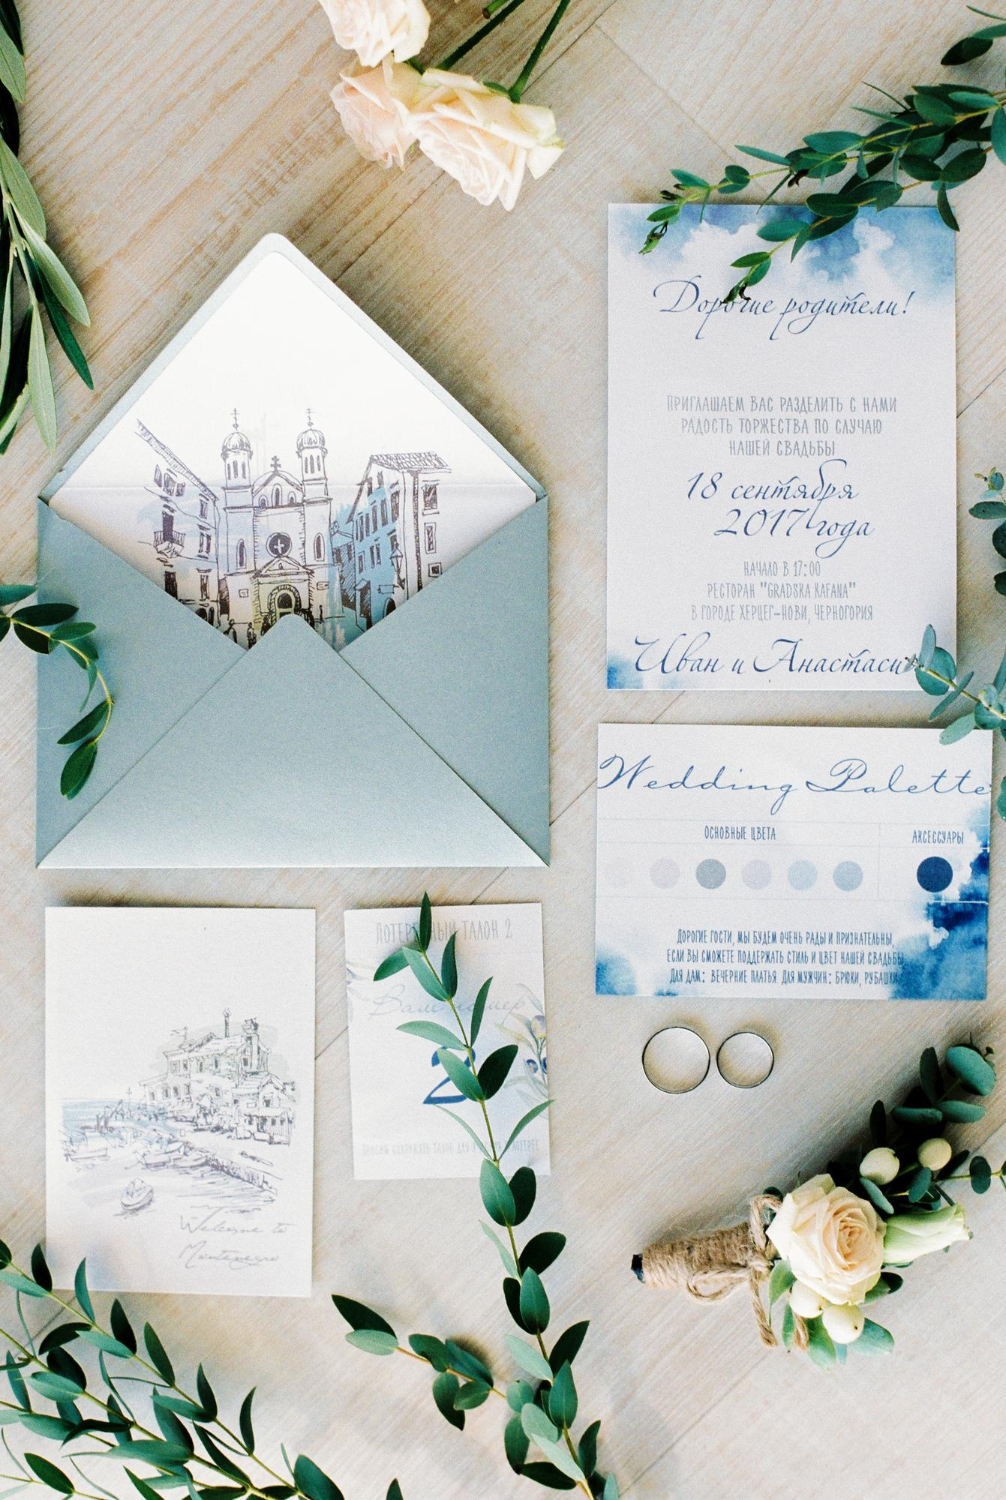 invitation cards with envelopes for the wedding lie next to the wedding rings